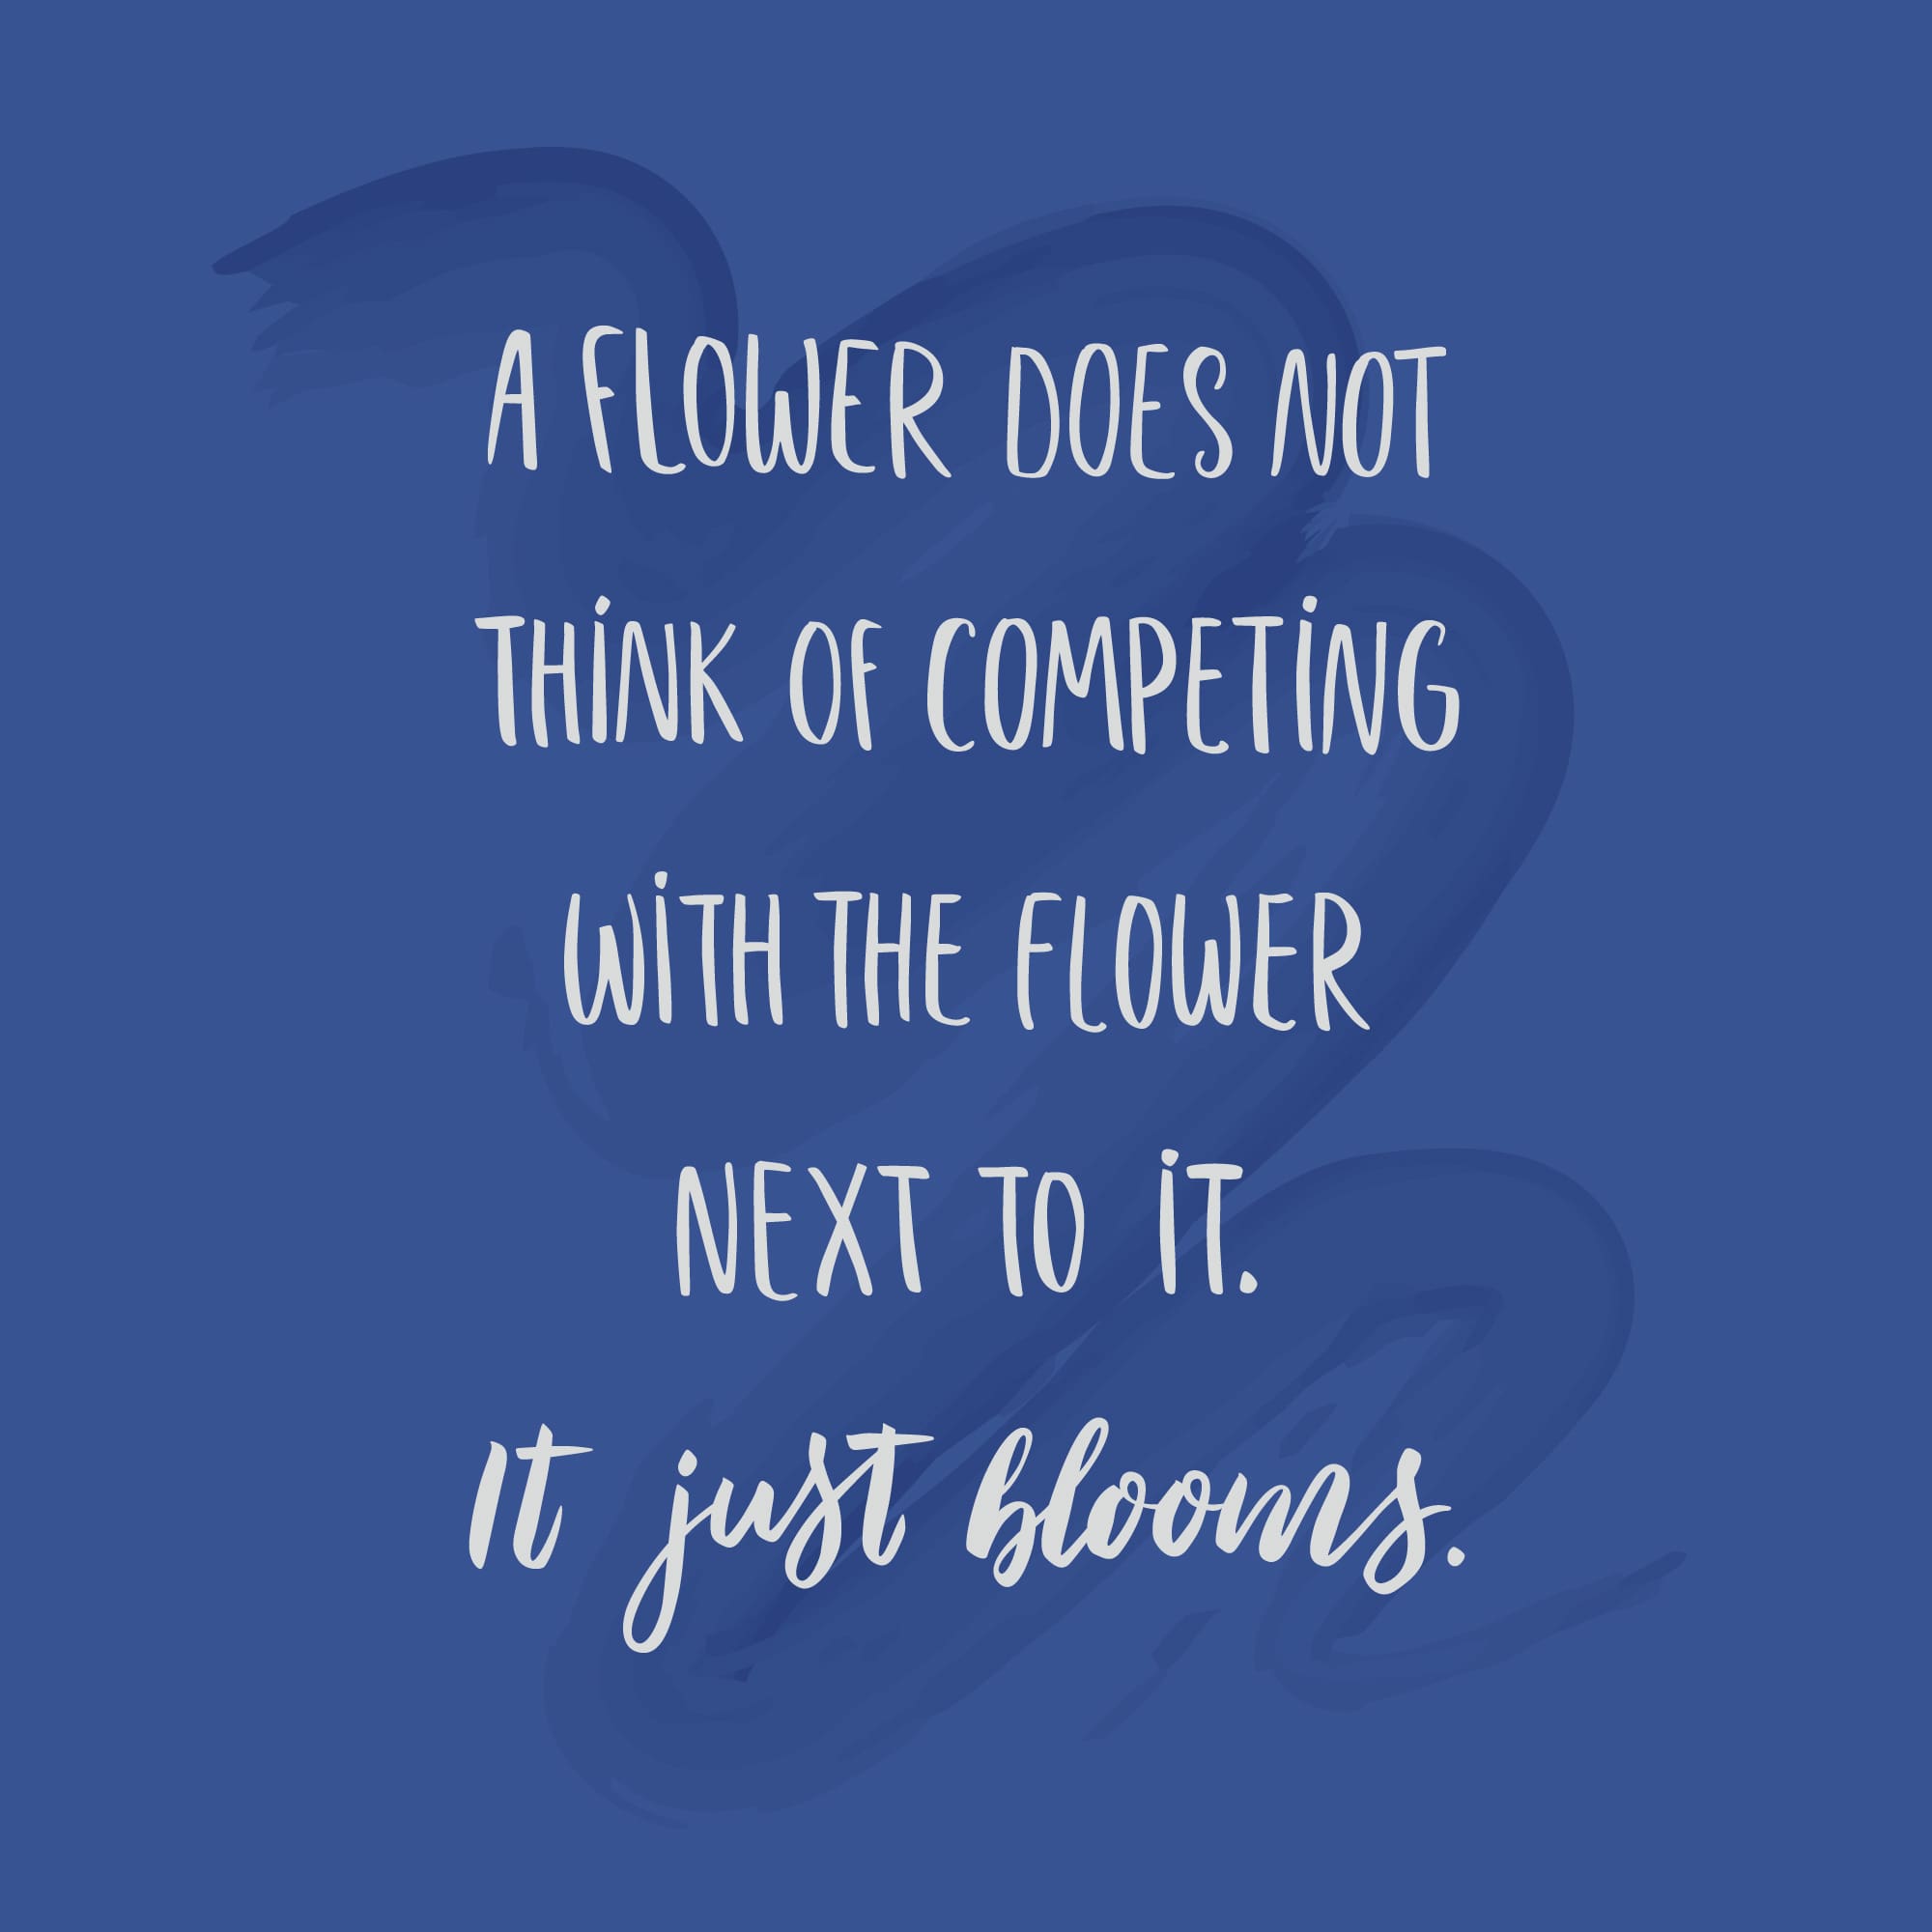 A flower does not think of competing with the flower next to it. It just blooms. I am outgoing.